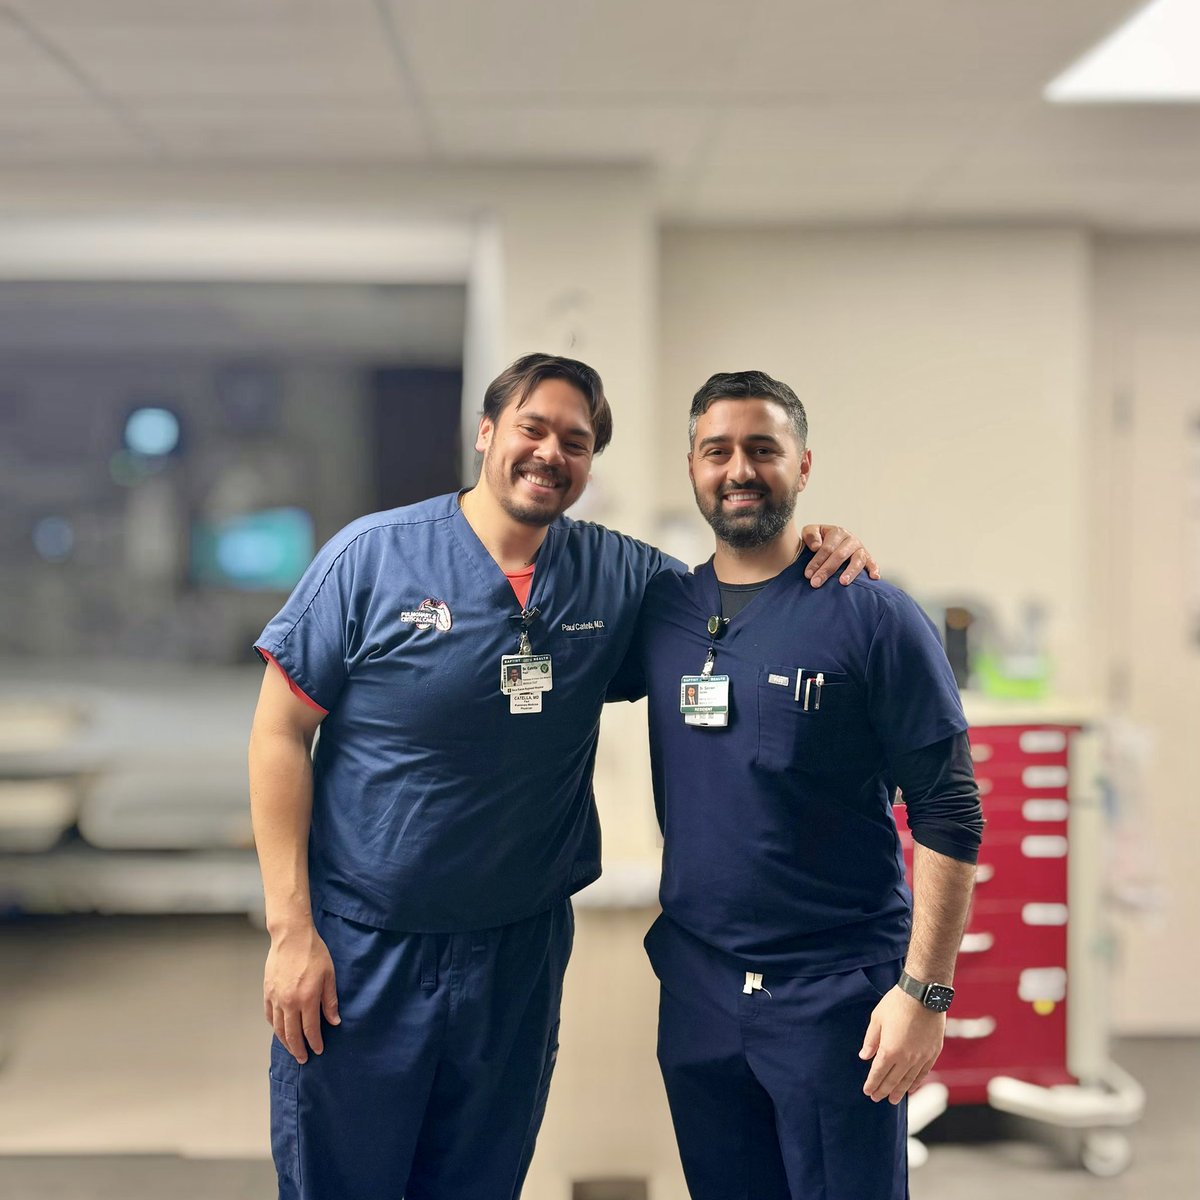 Today is very special & bittersweet, as it’s my last day on core rotations in residency 😮. What a better way than to end with such a great attending & intensivist, Dr. Paul Catella. I’ve never felt more empowered as a physician 💪 #ICU #PCCM #InternalMedicine #PGY3 #Residency